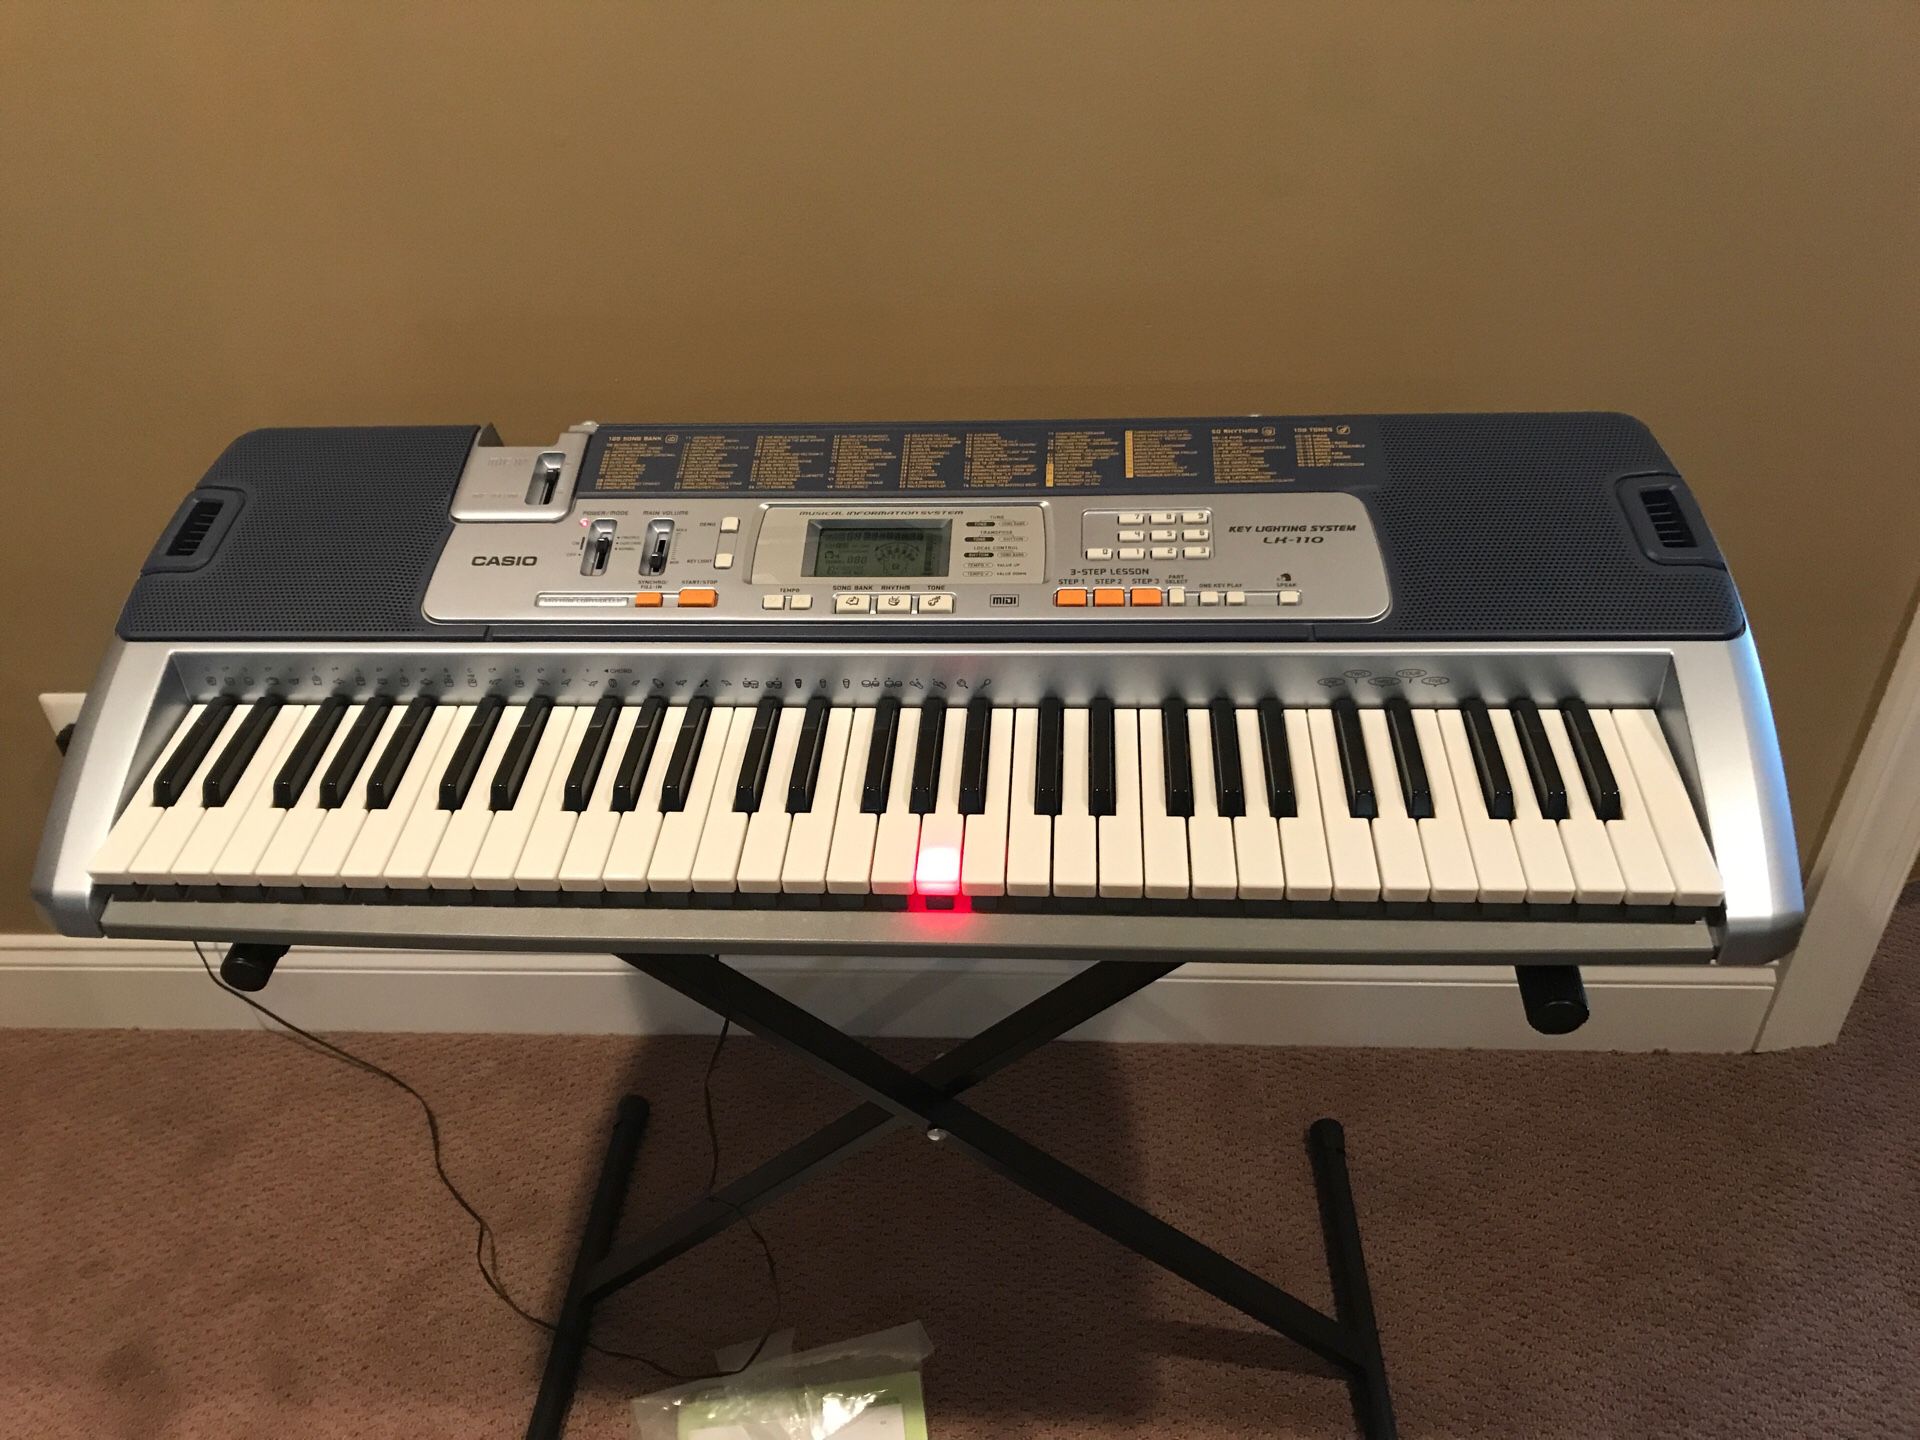 Casio Lighted Keyboard with Application Integration LK110